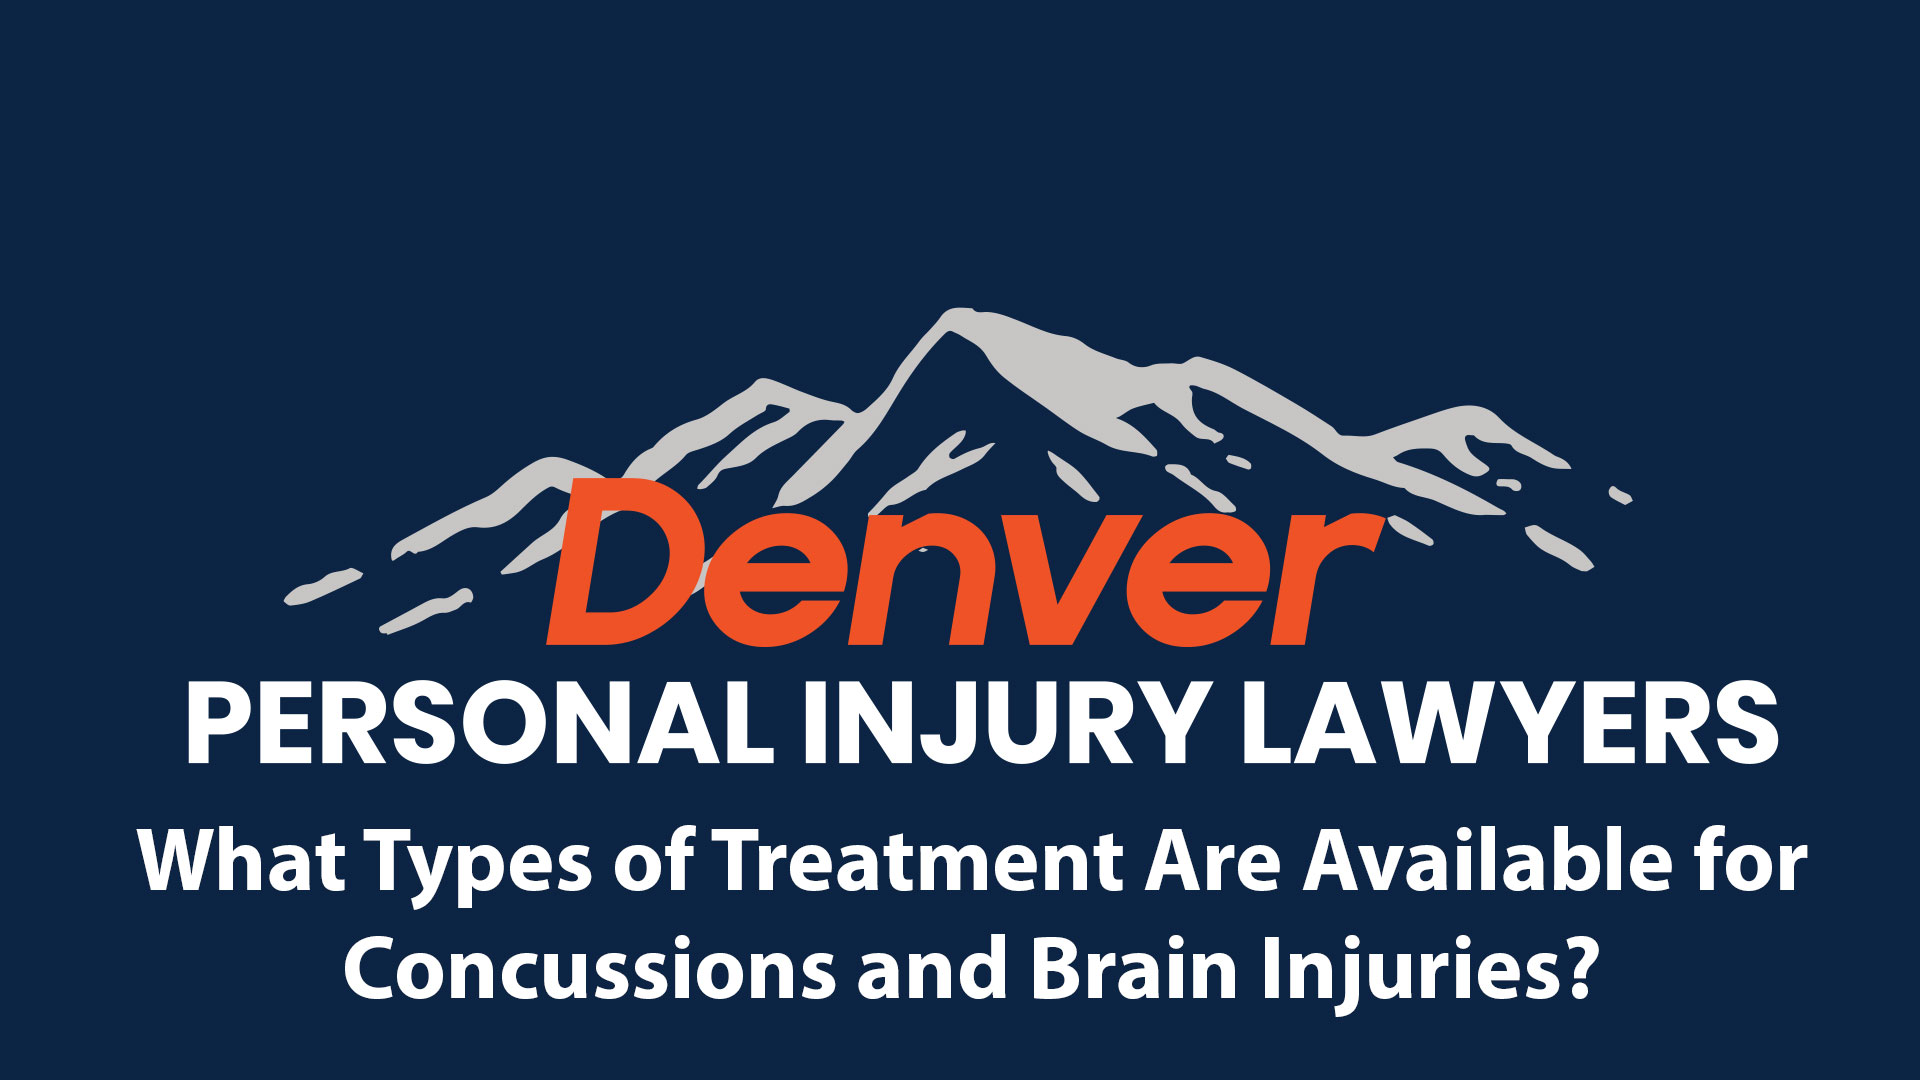 What Types of Treatment Are Available for Concussions and Brain Injuries?